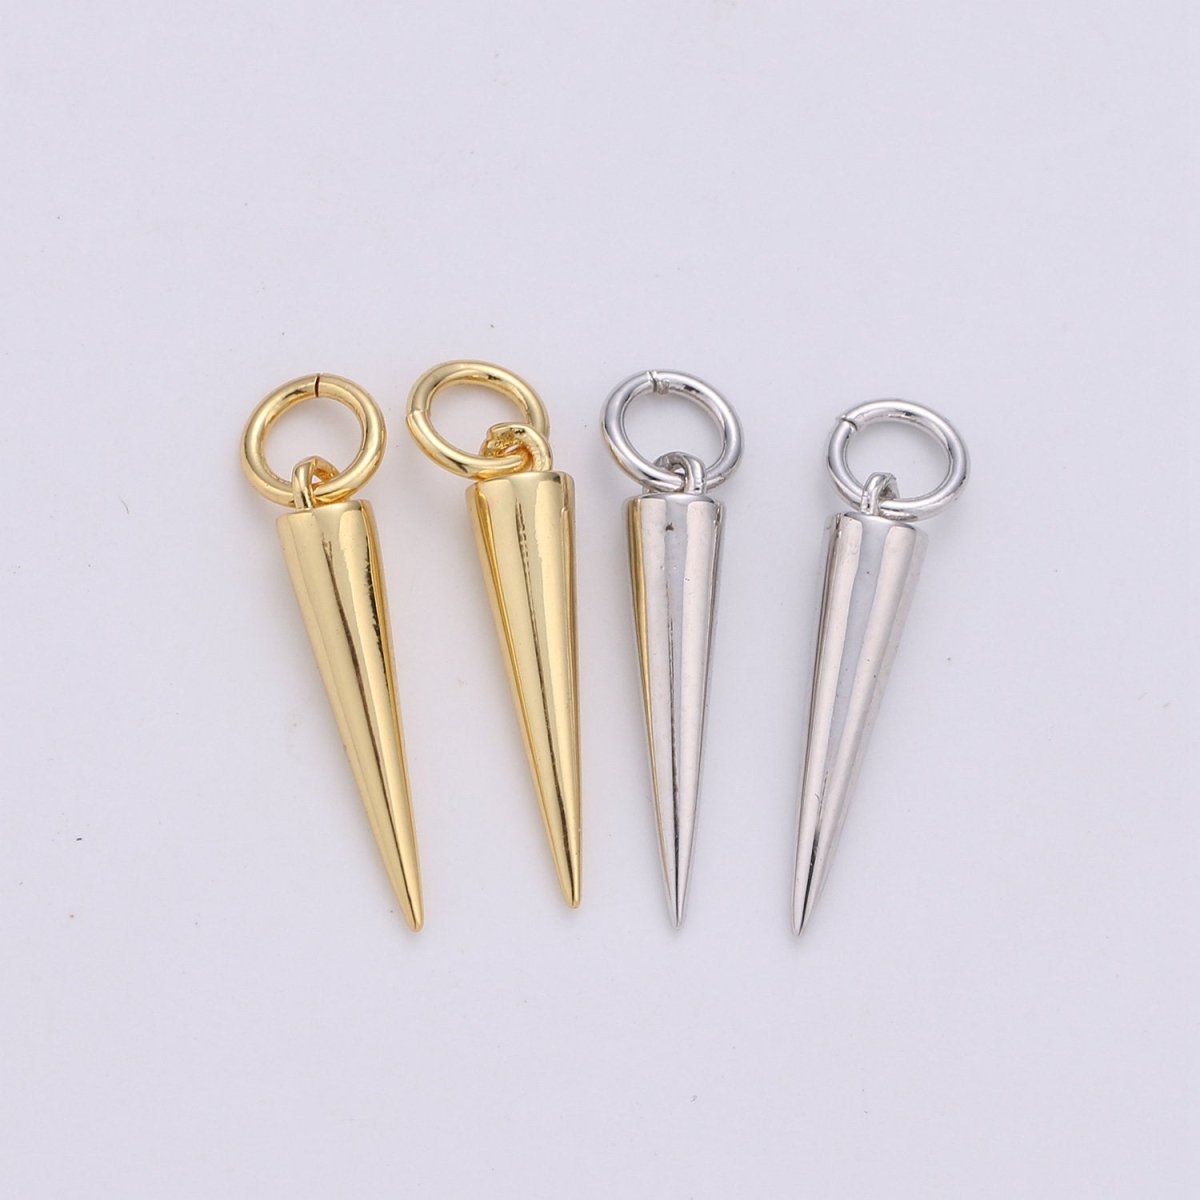 24k Gold Filled Dainty Gold Spike Charms Drop Pendulum Pendant Stud Charm Minimalist Jewelry Supply Findings for Necklace Earring Components E-254 E-255 - DLUXCA